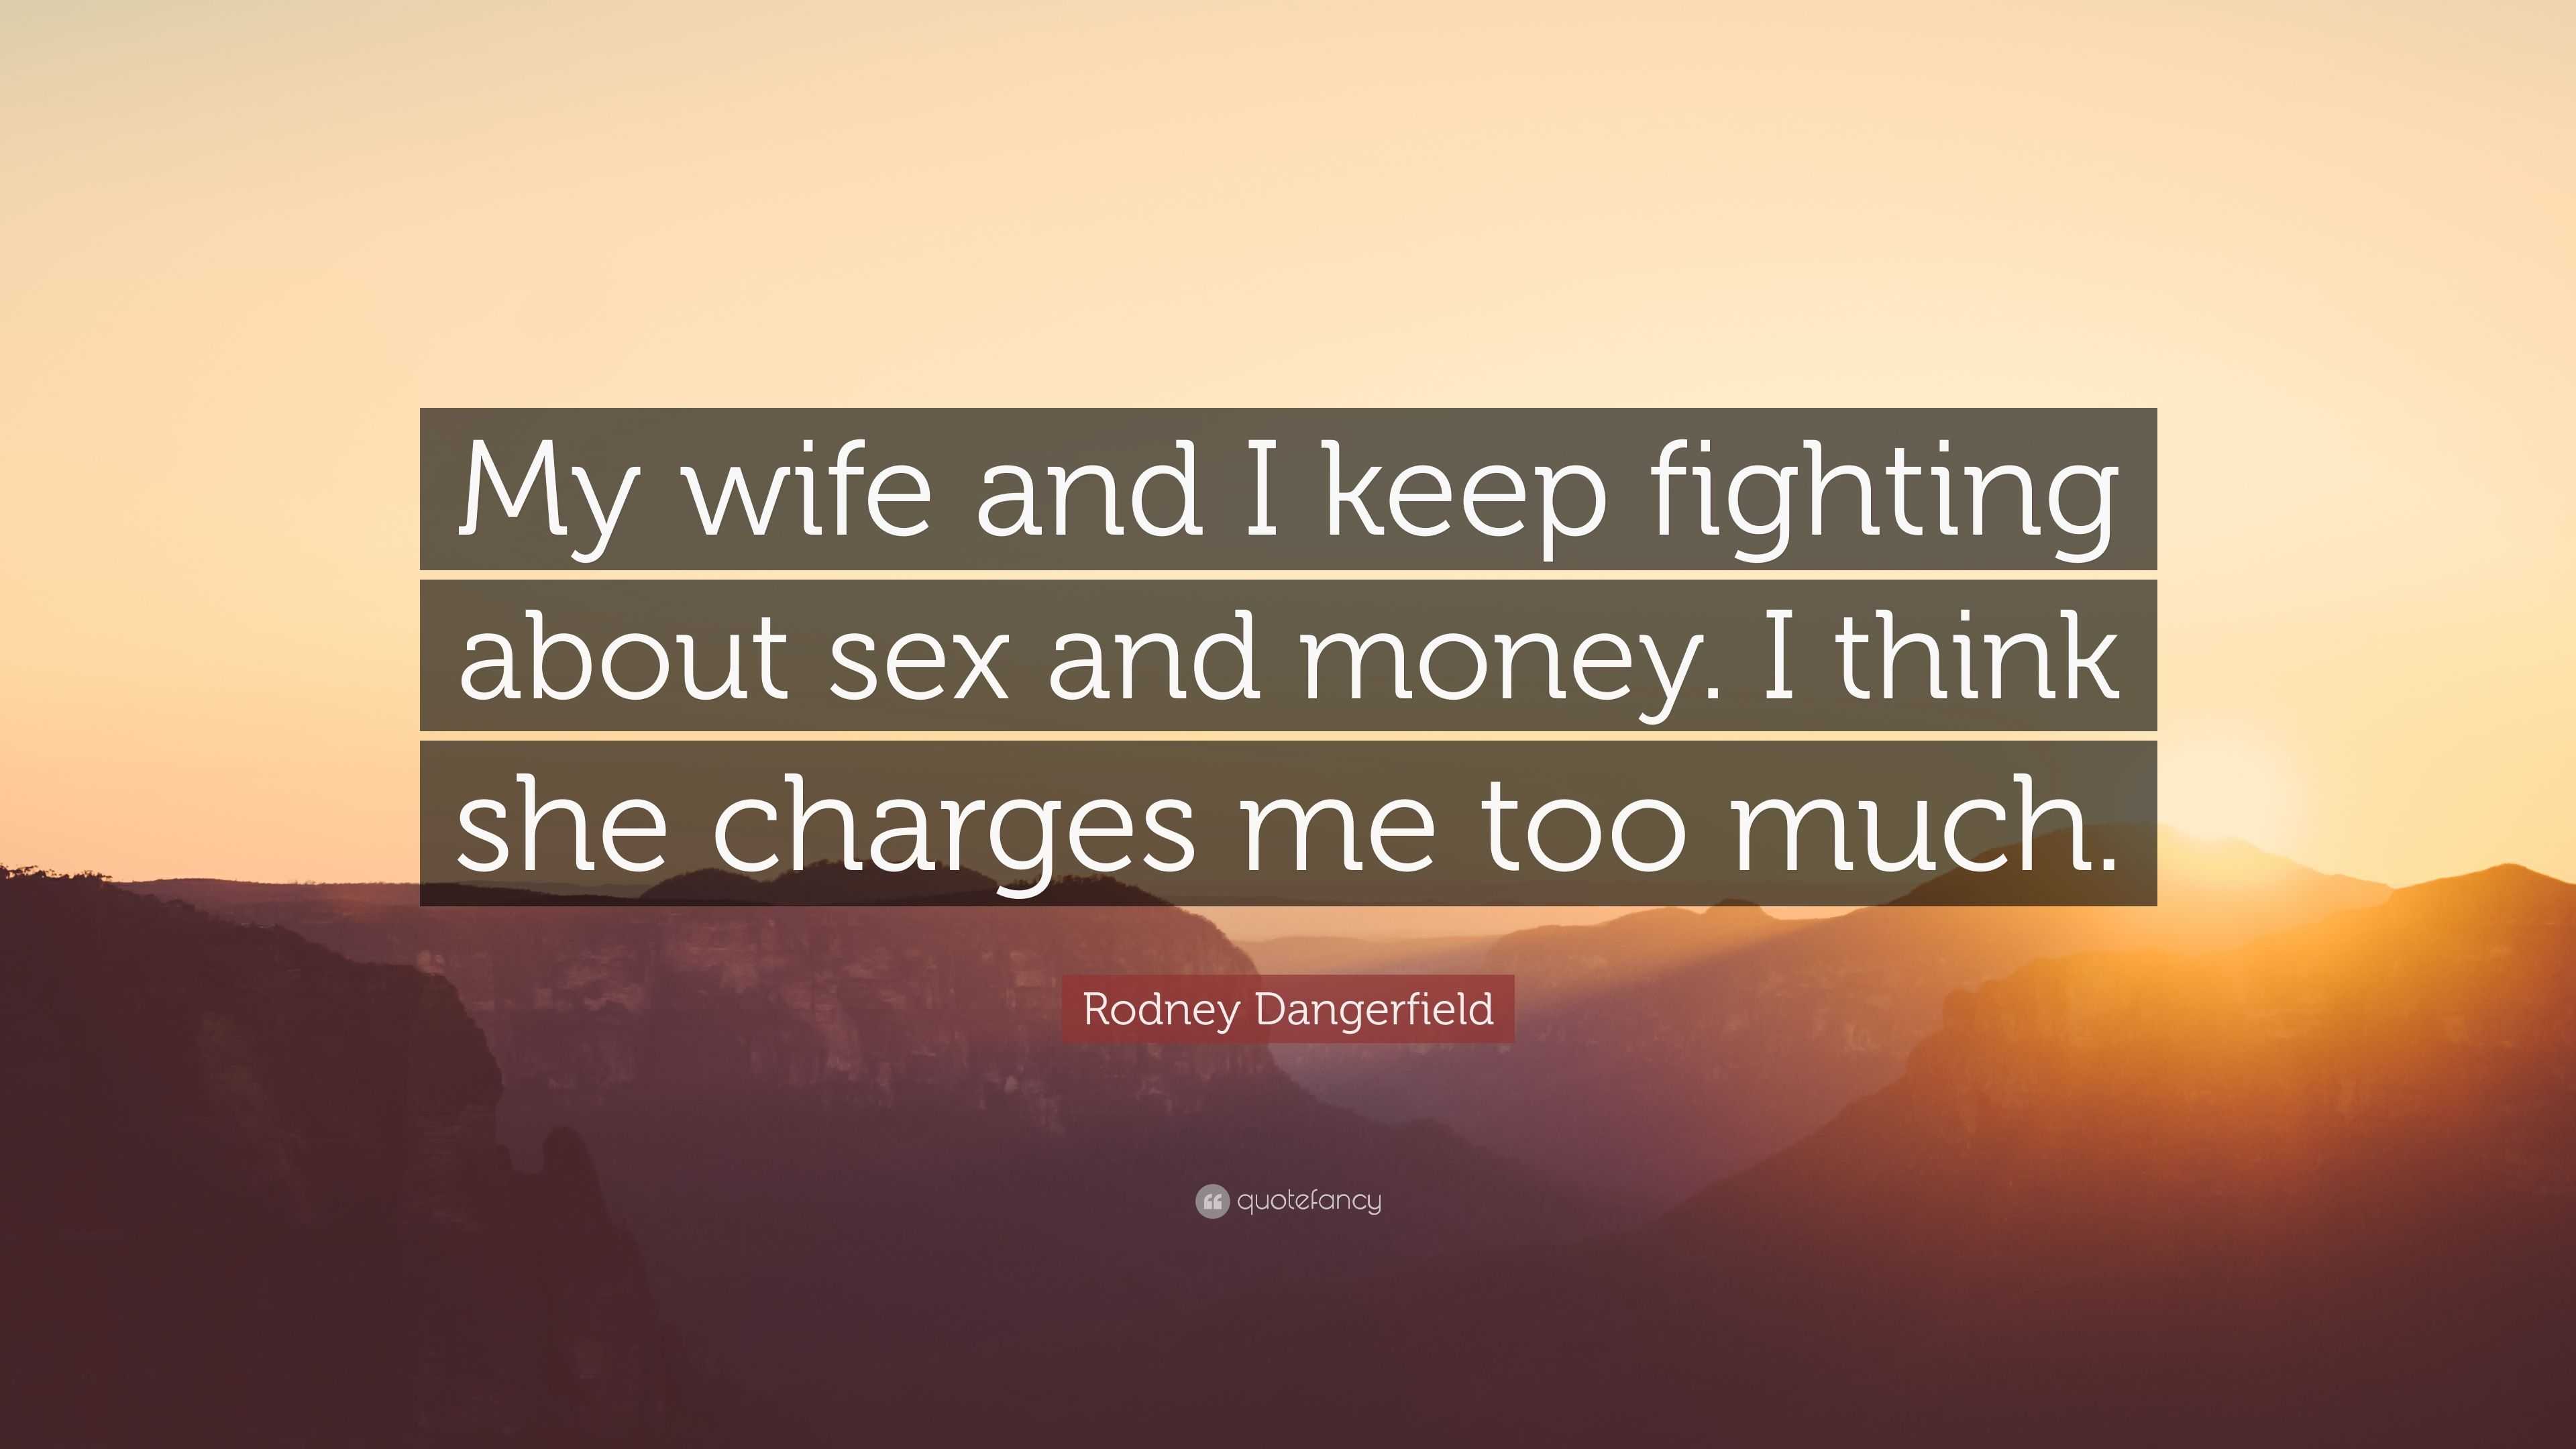 Rodney Dangerfield Quote “My wife and I keep fighting about sex and money